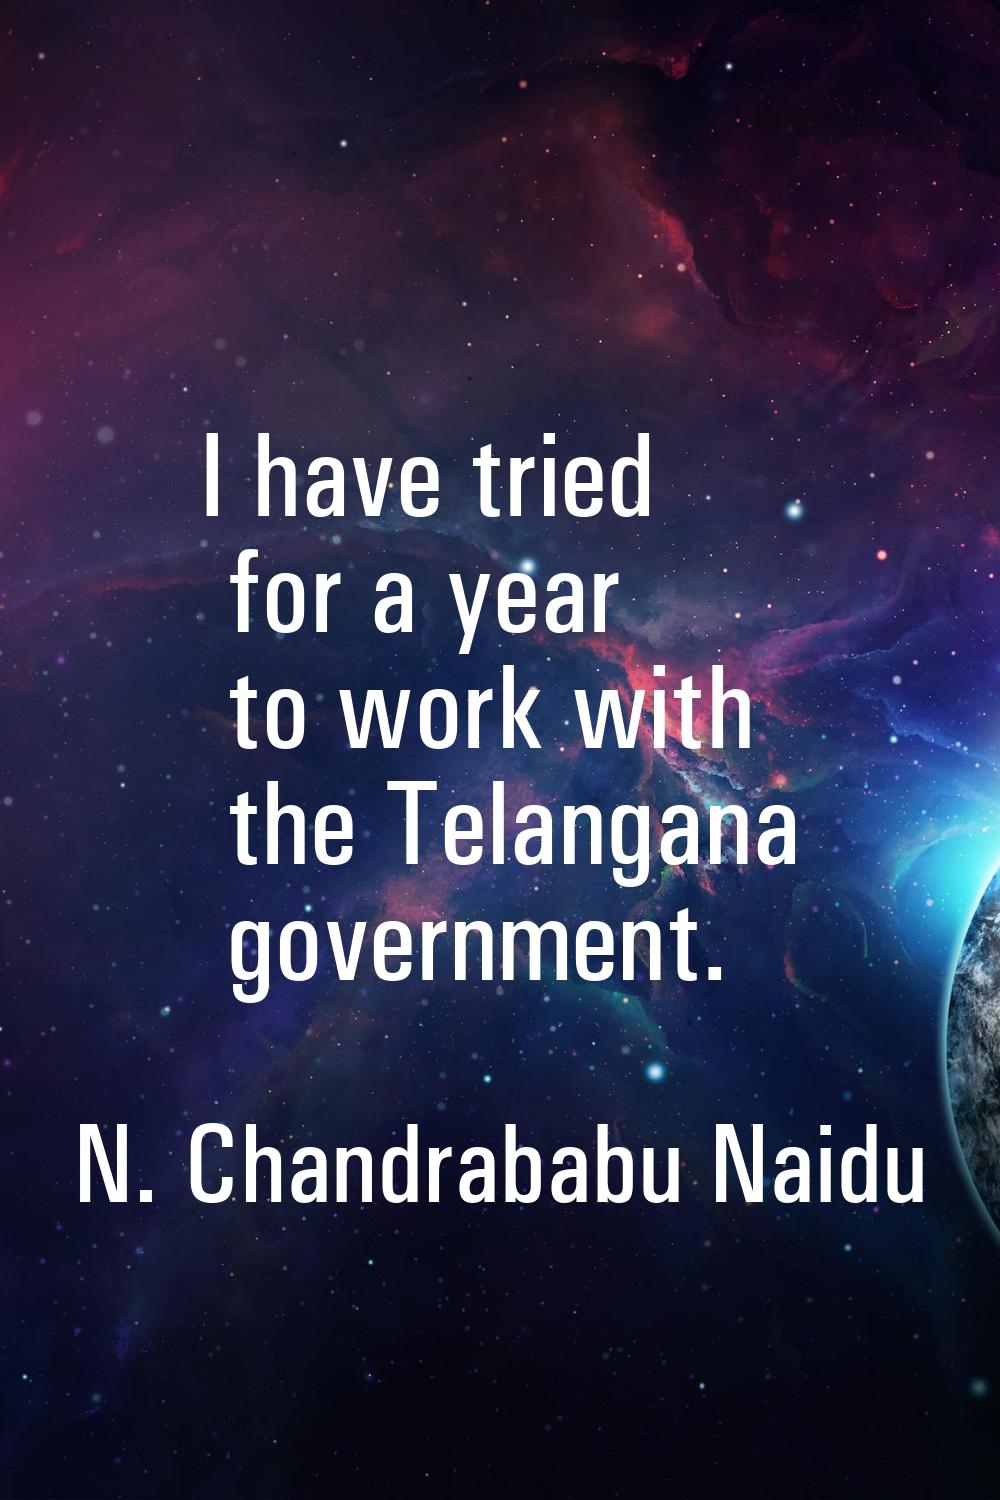 I have tried for a year to work with the Telangana government.